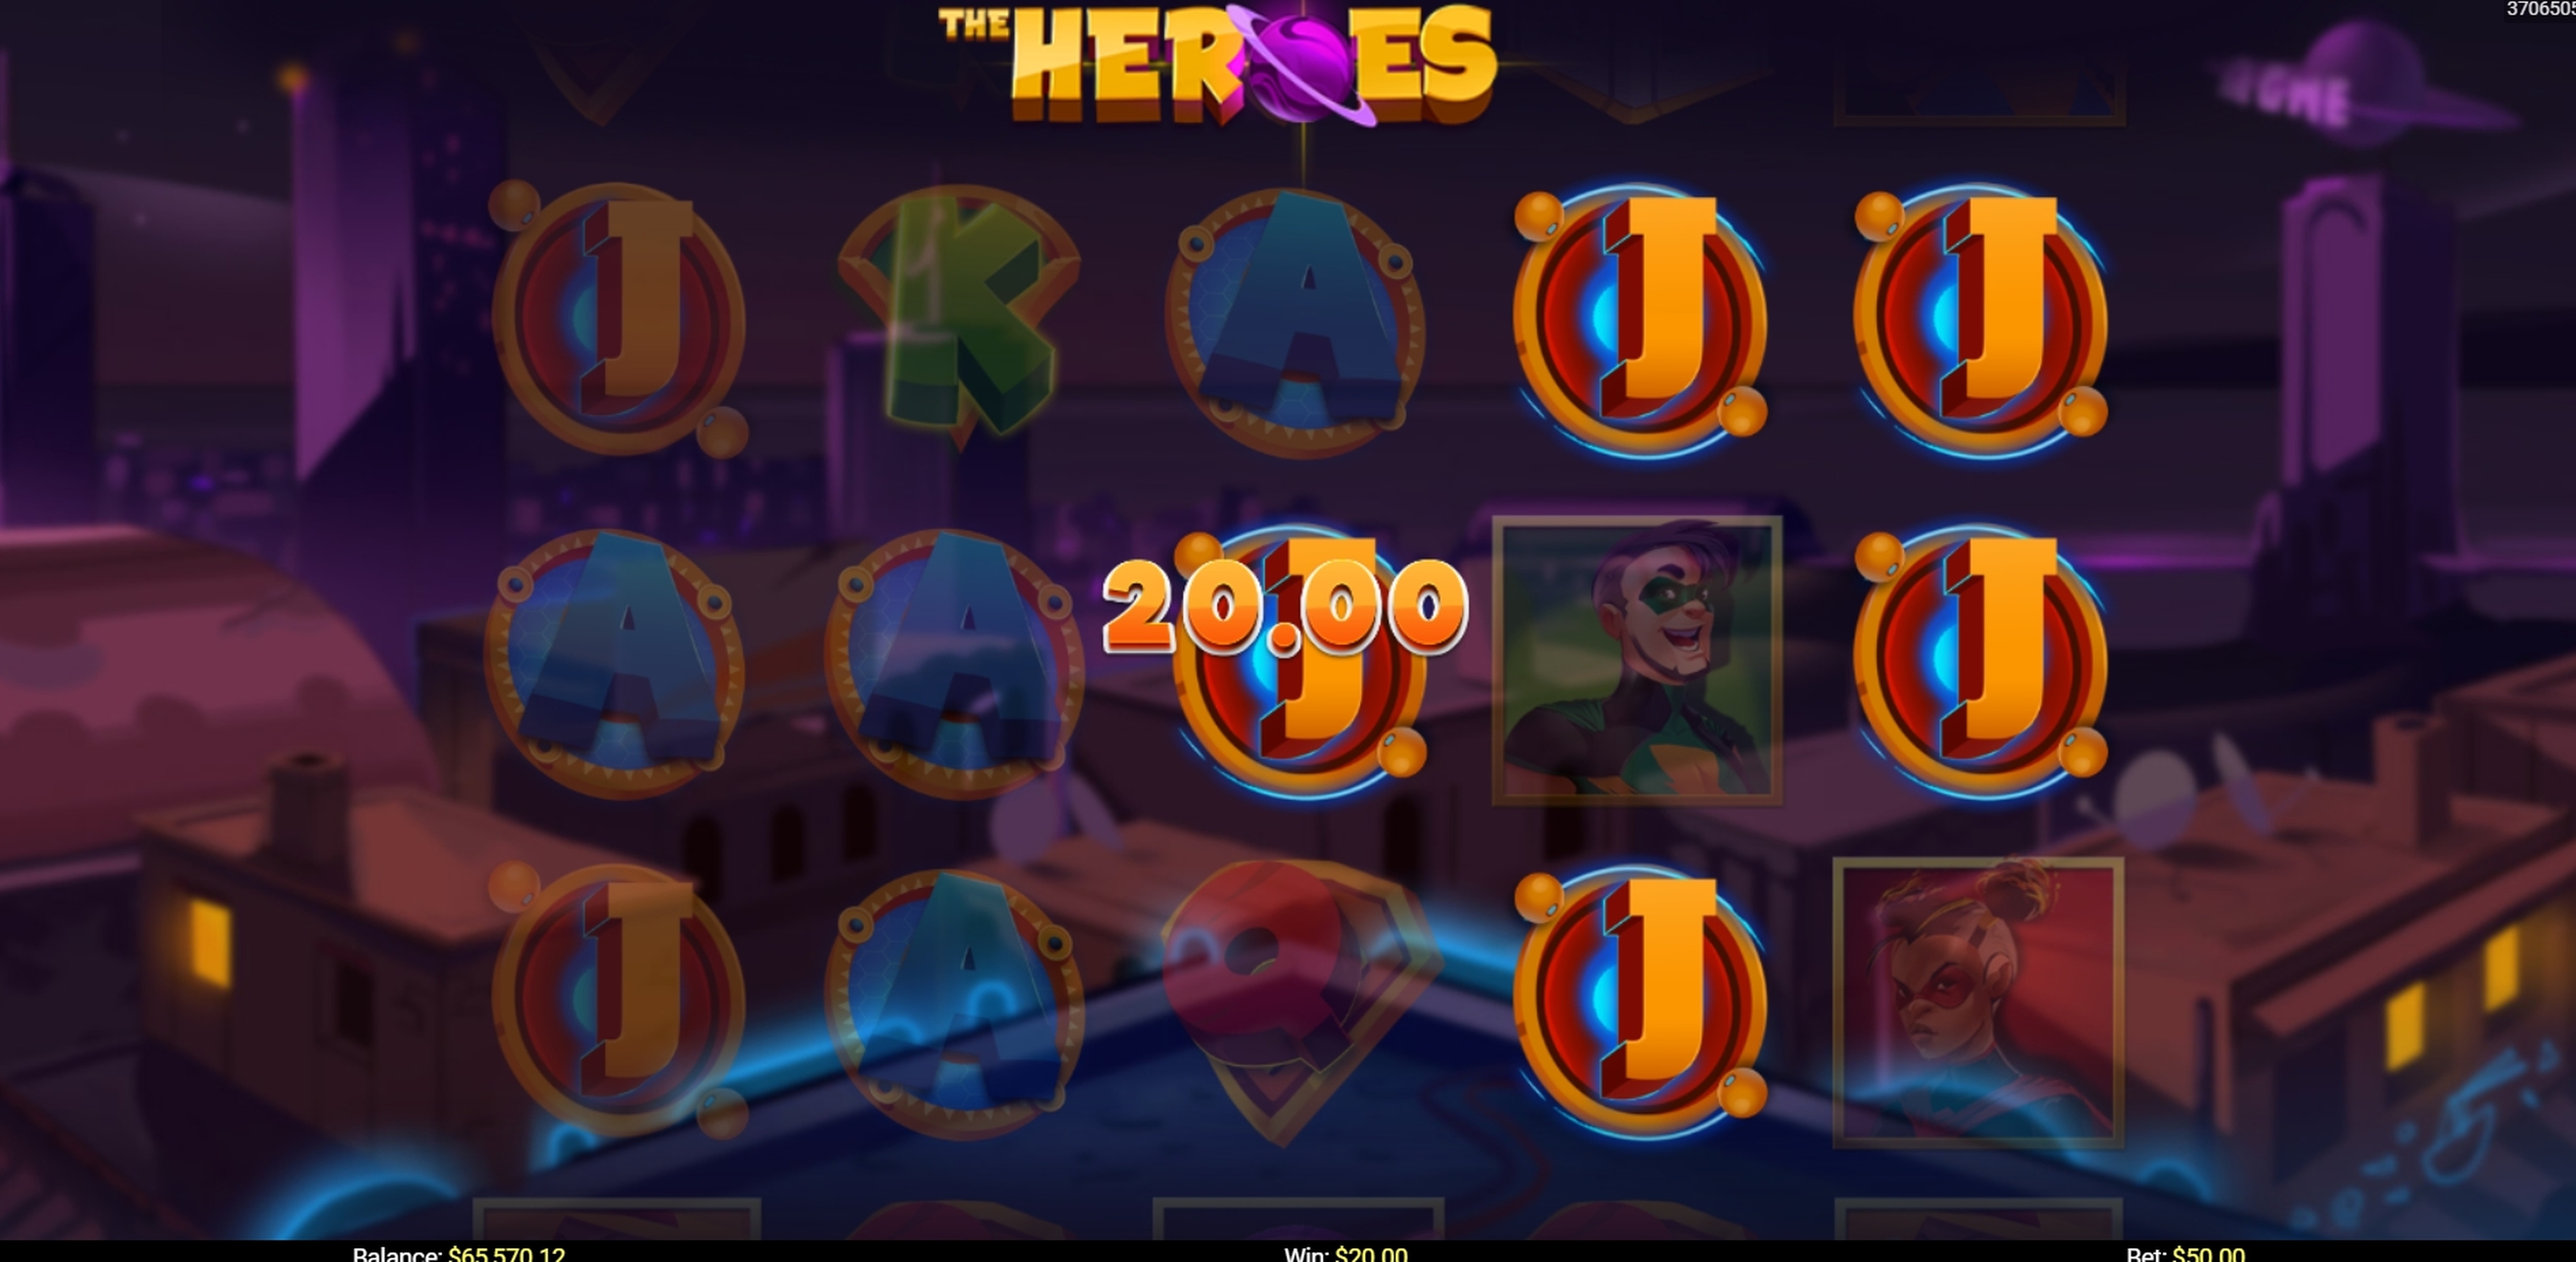 Win Money in The Heroes Free Slot Game by Mobilots